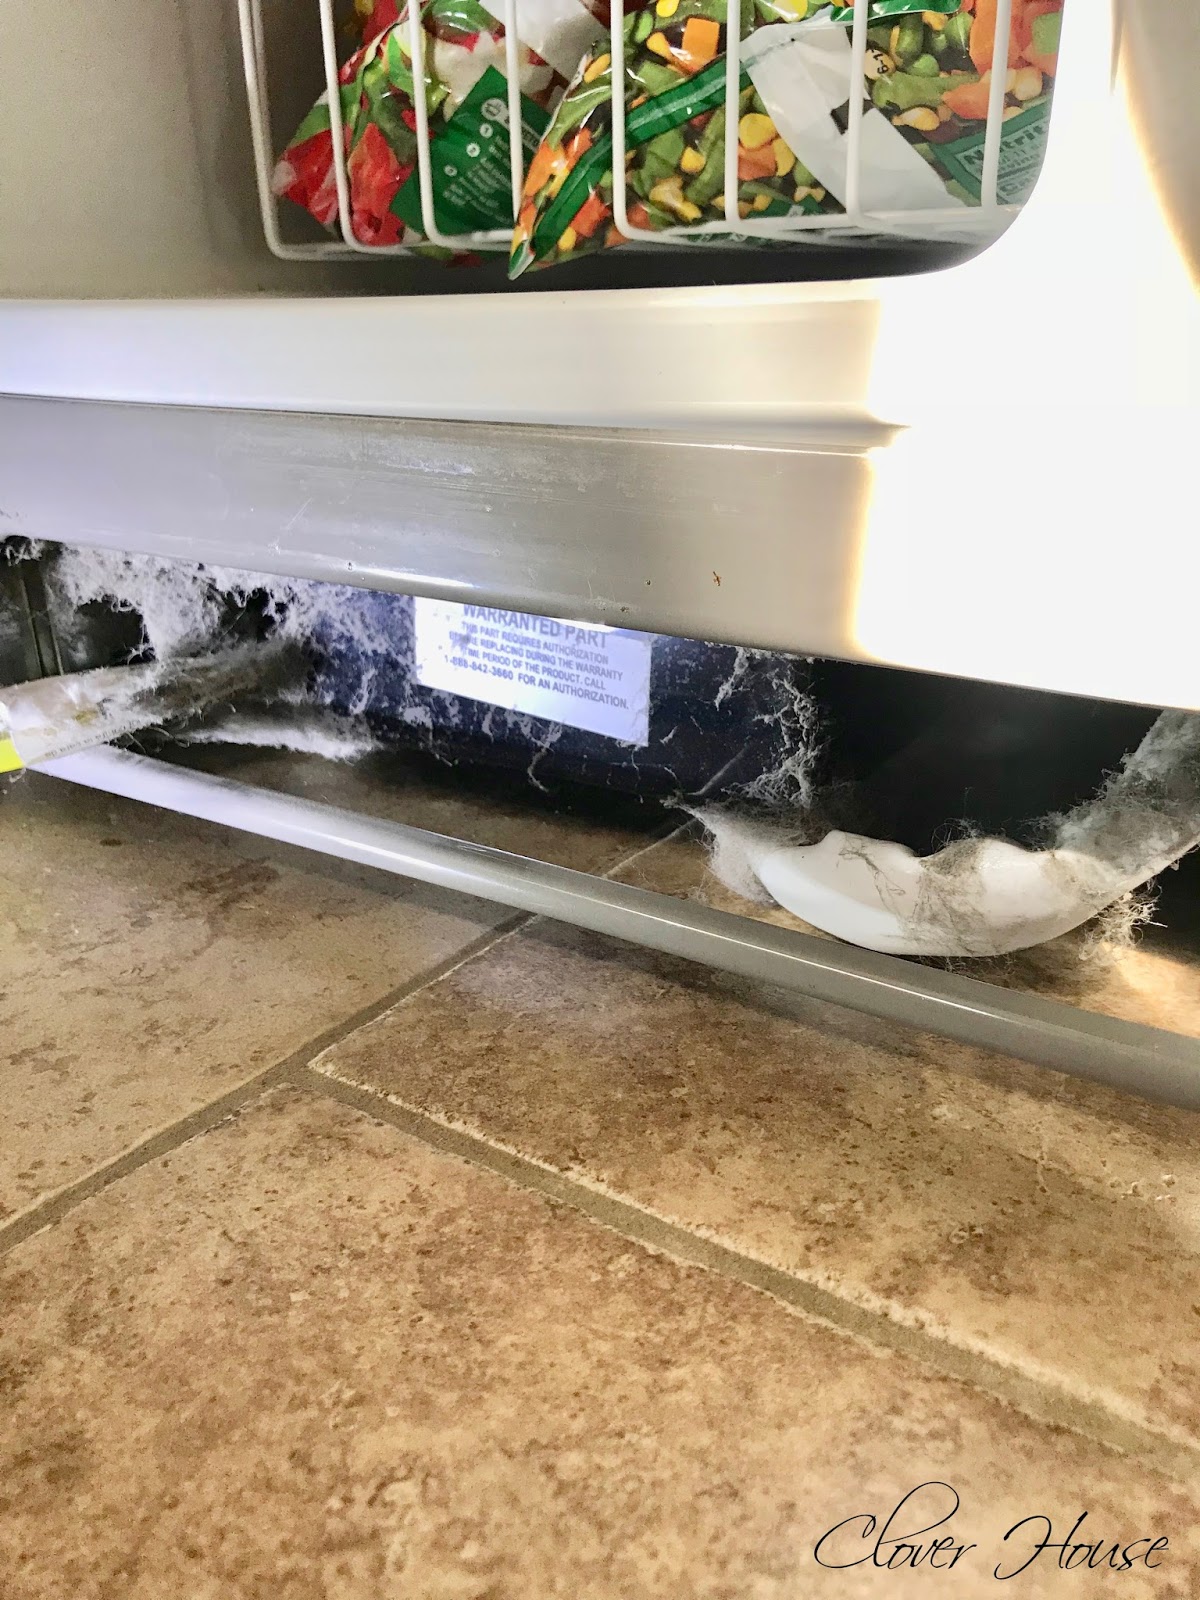 Refrigerator Cleaning - Dust It Down